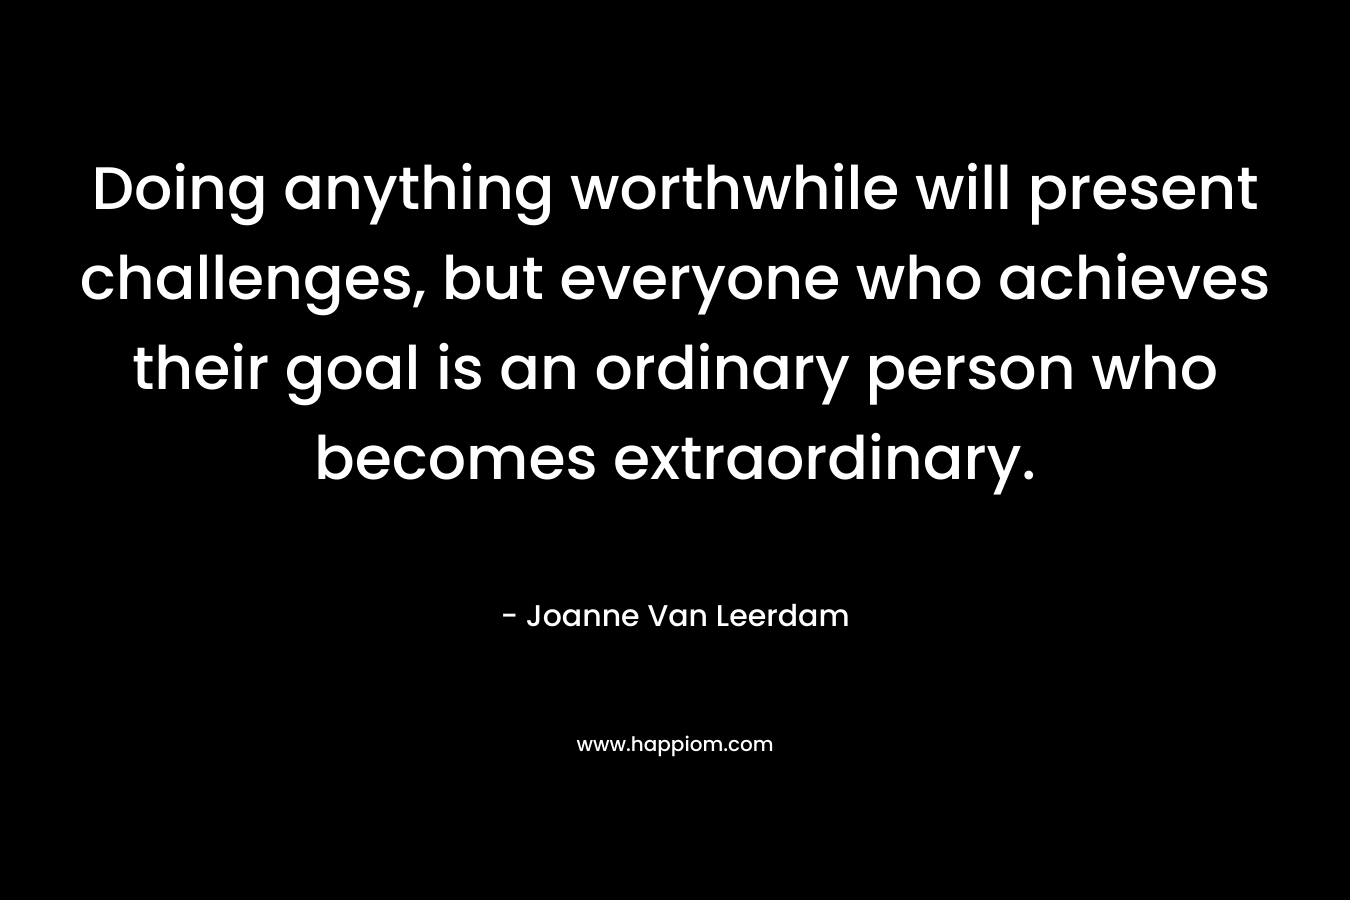 Doing anything worthwhile will present challenges, but everyone who achieves their goal is an ordinary person who becomes extraordinary.